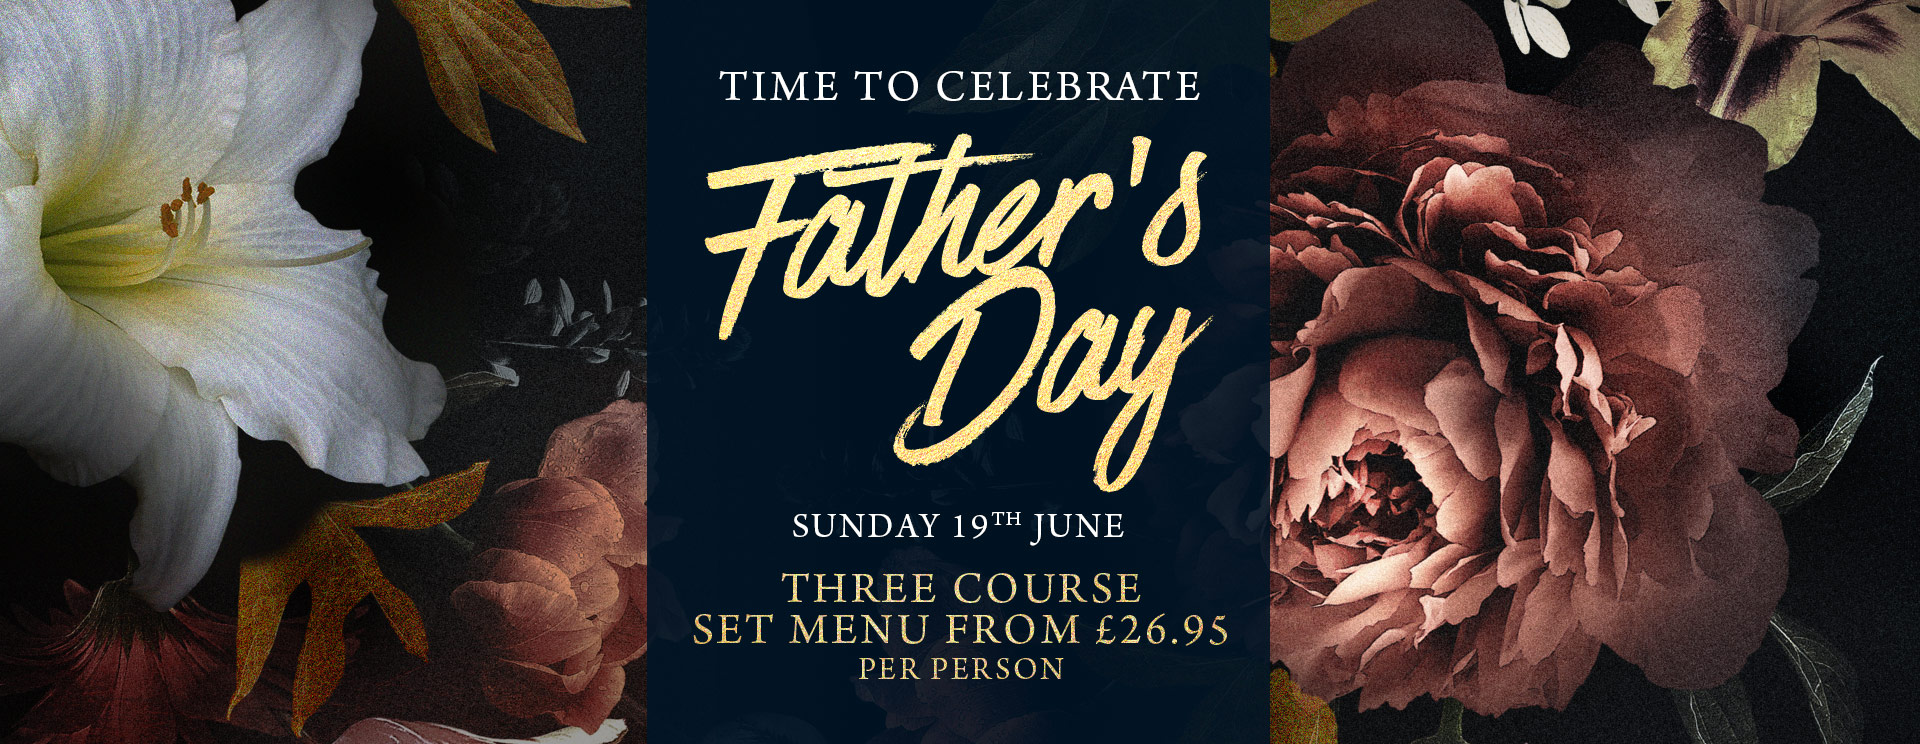 Fathers Day at The Salisbury Arms